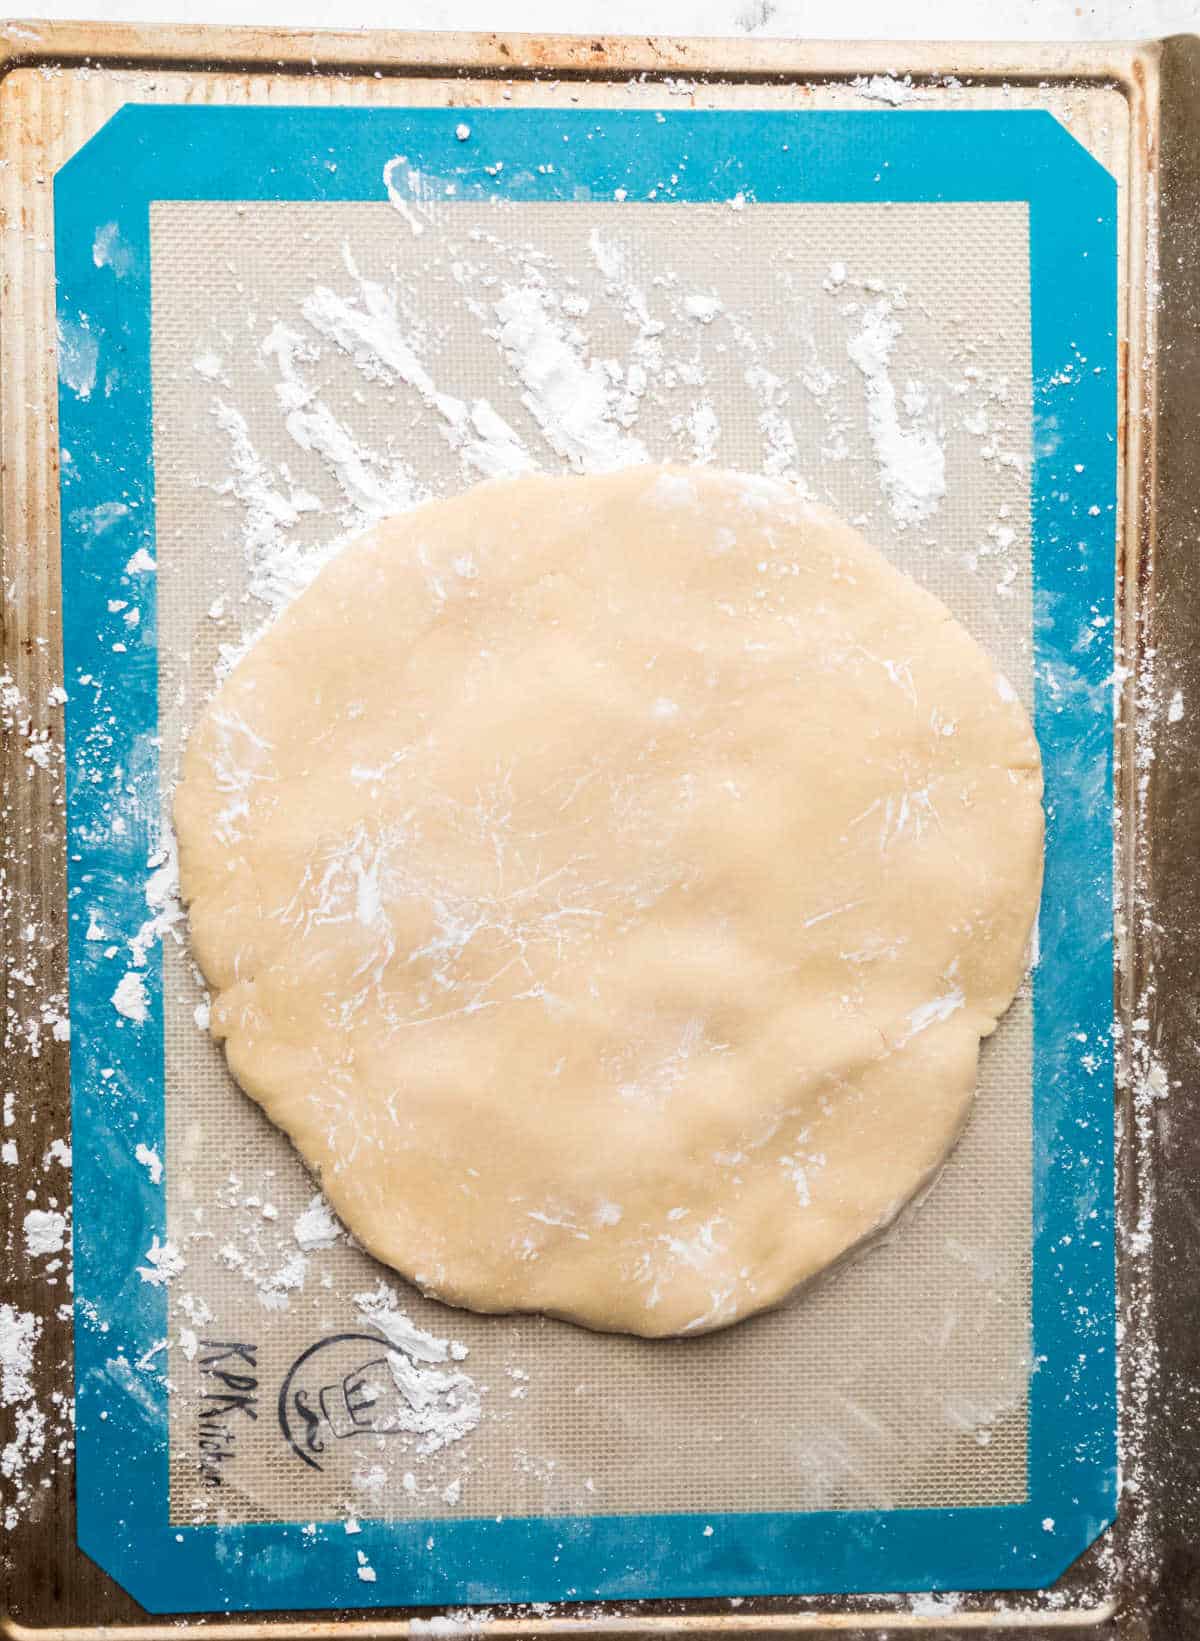 Sugar cookie dough rolled out on a silicone baking mat.